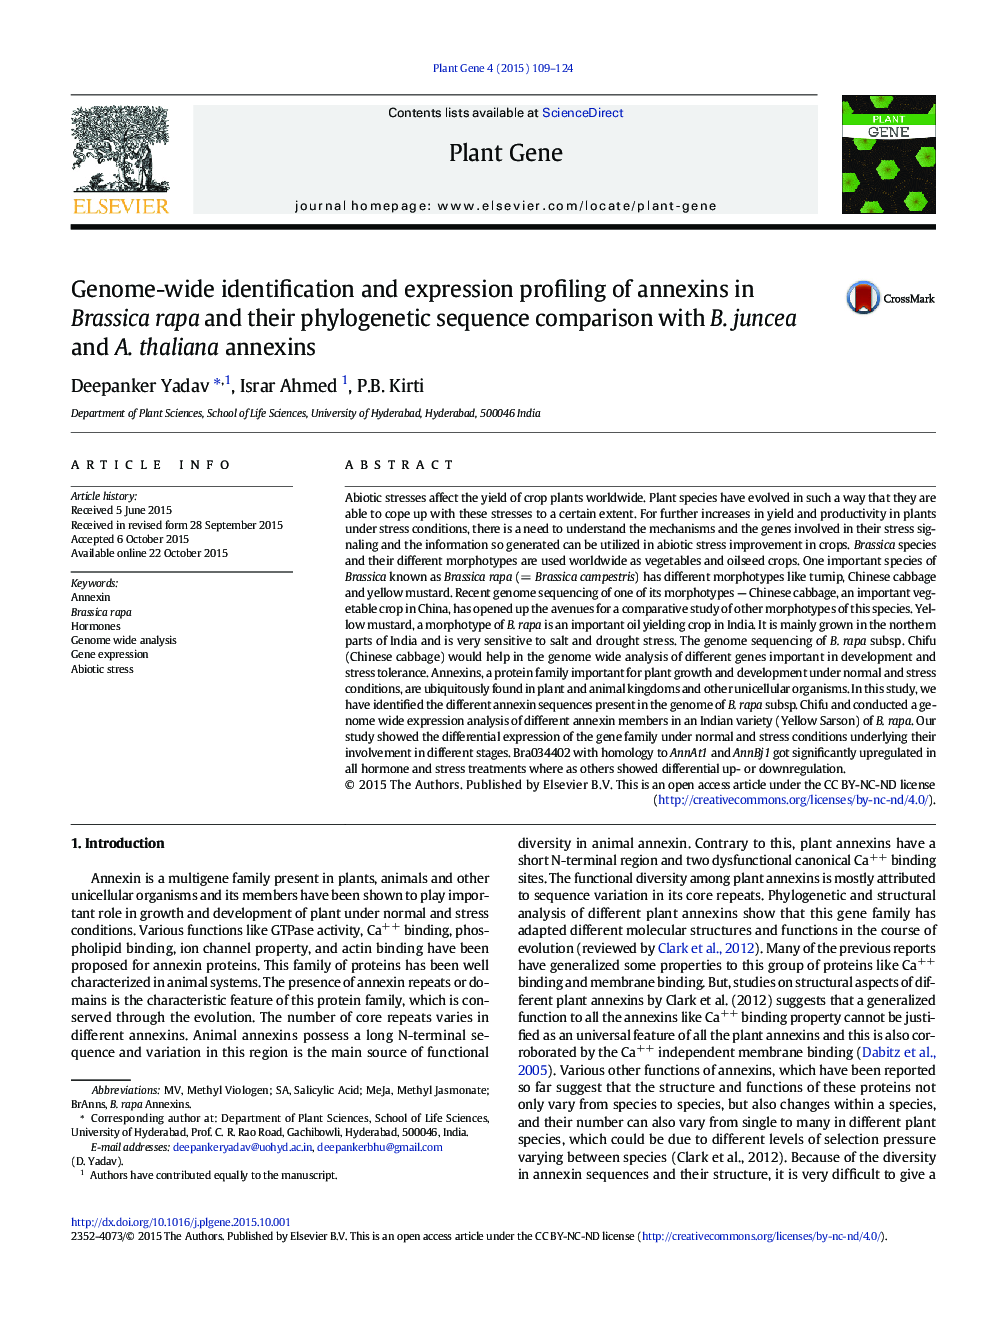 Genome-wide identification and expression profiling of annexins in Brassica rapa and their phylogenetic sequence comparison with B. juncea and A. thaliana annexins